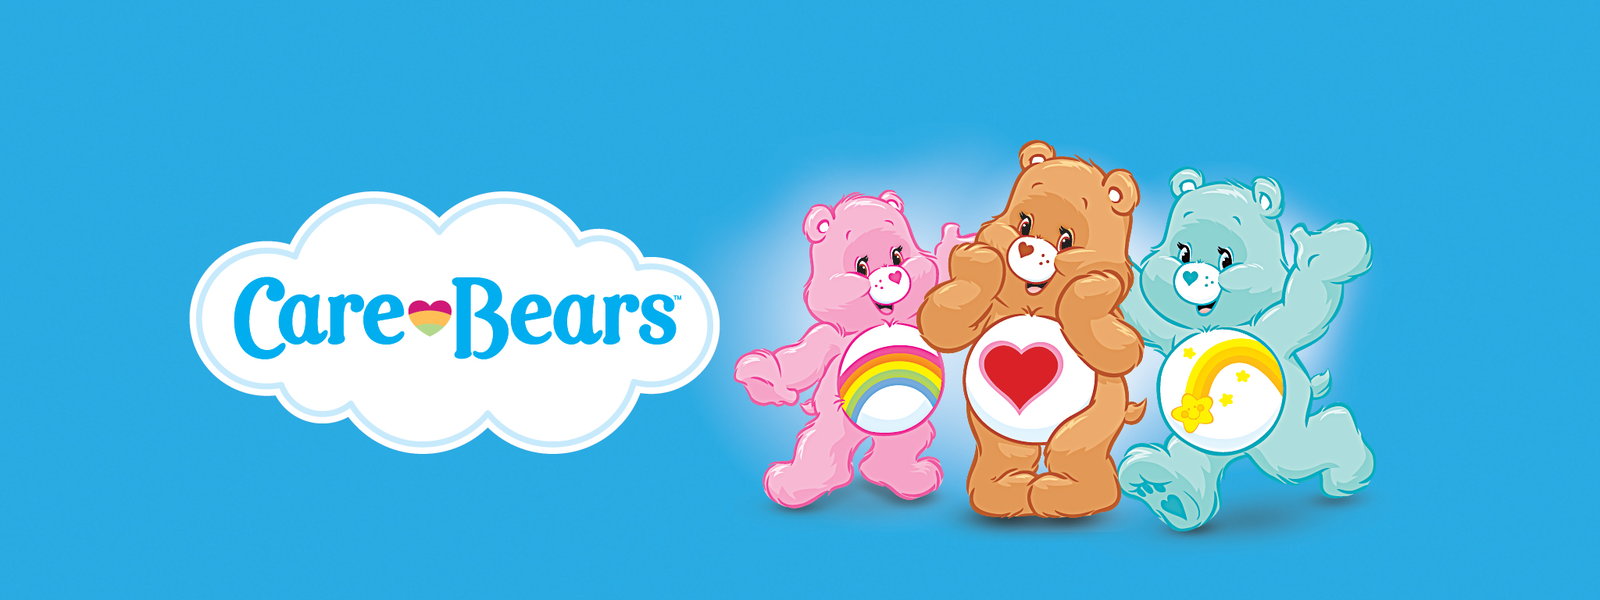 Download Love A Lot Care Bear Svg - Layered SVG Cut File - 3 care bear lo.....